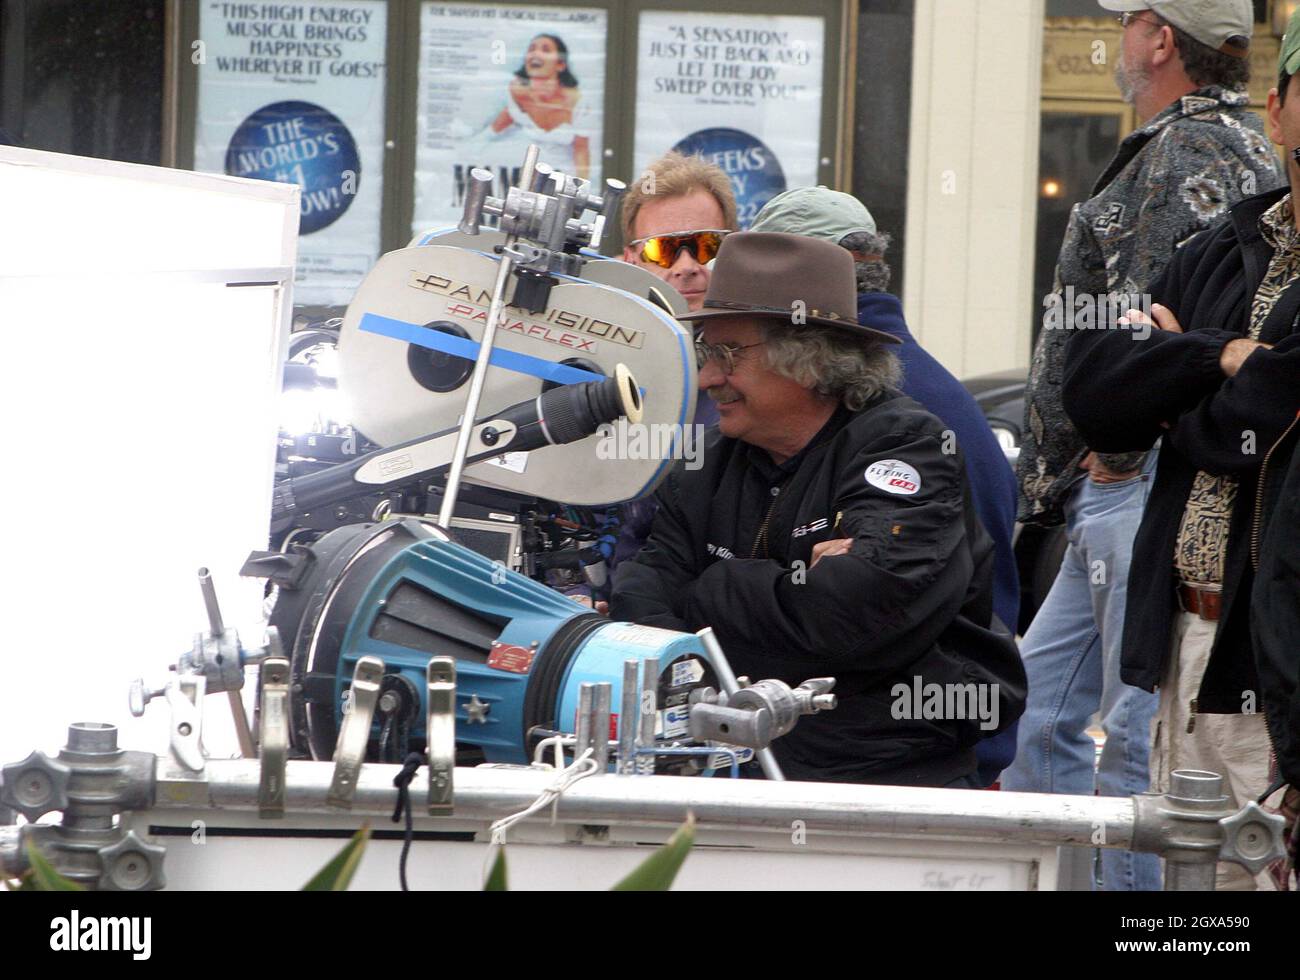 John Travolta and Uma Thurman shooting the sequel to Get Shorty called Be Cool in Hollywood Boulevard. Stock Photo